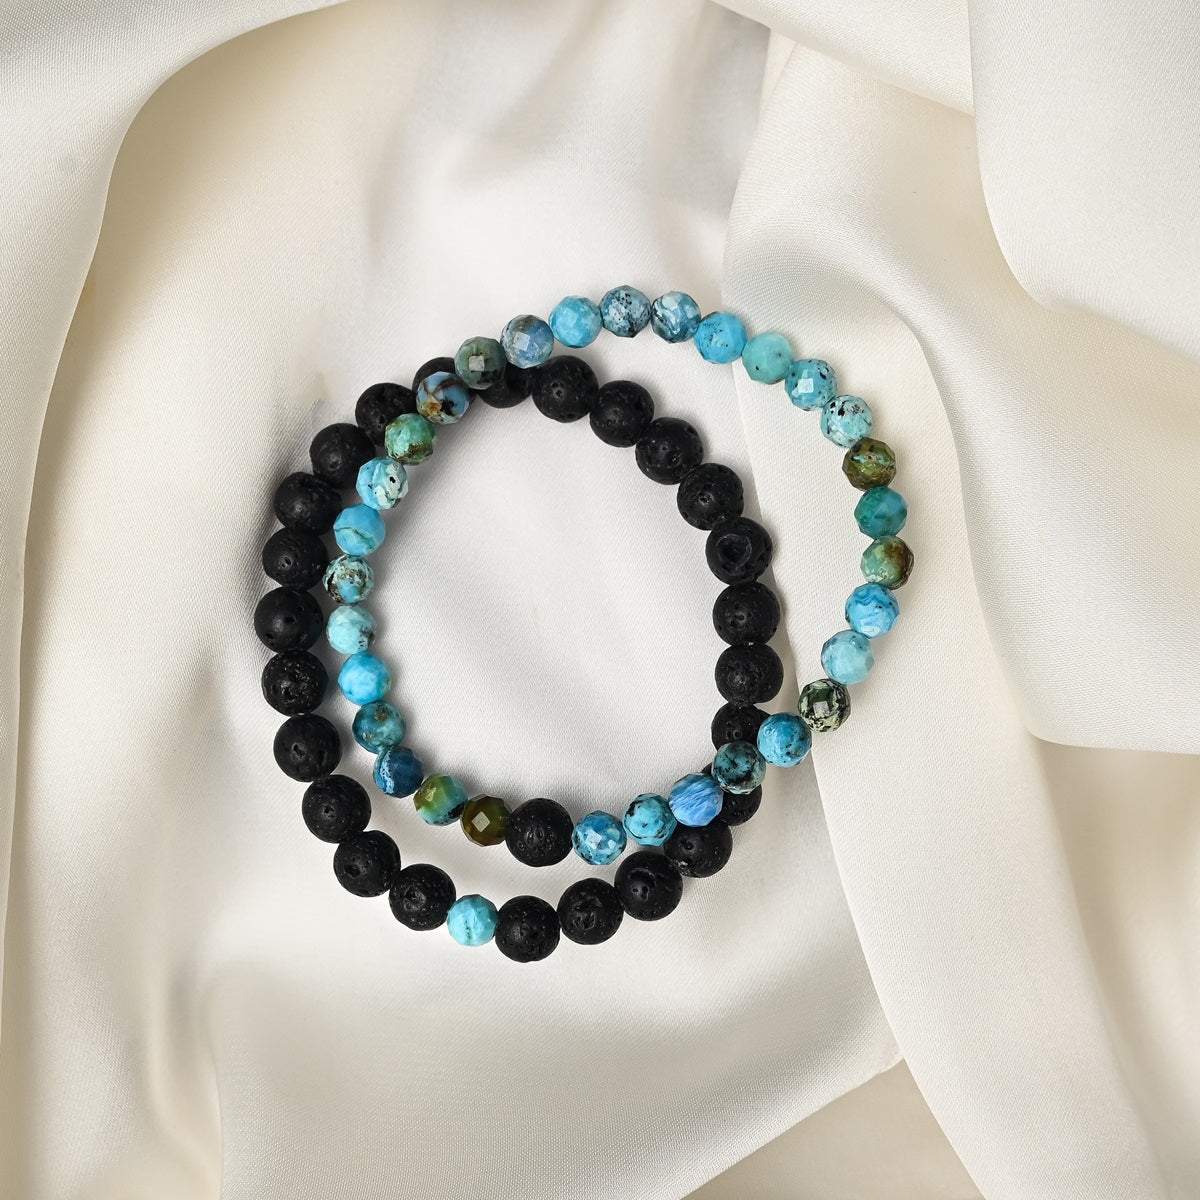 Detailed close-up showcasing the intricate beauty of Opaline's faceted round beads and the contrasting black Lava gemstones.